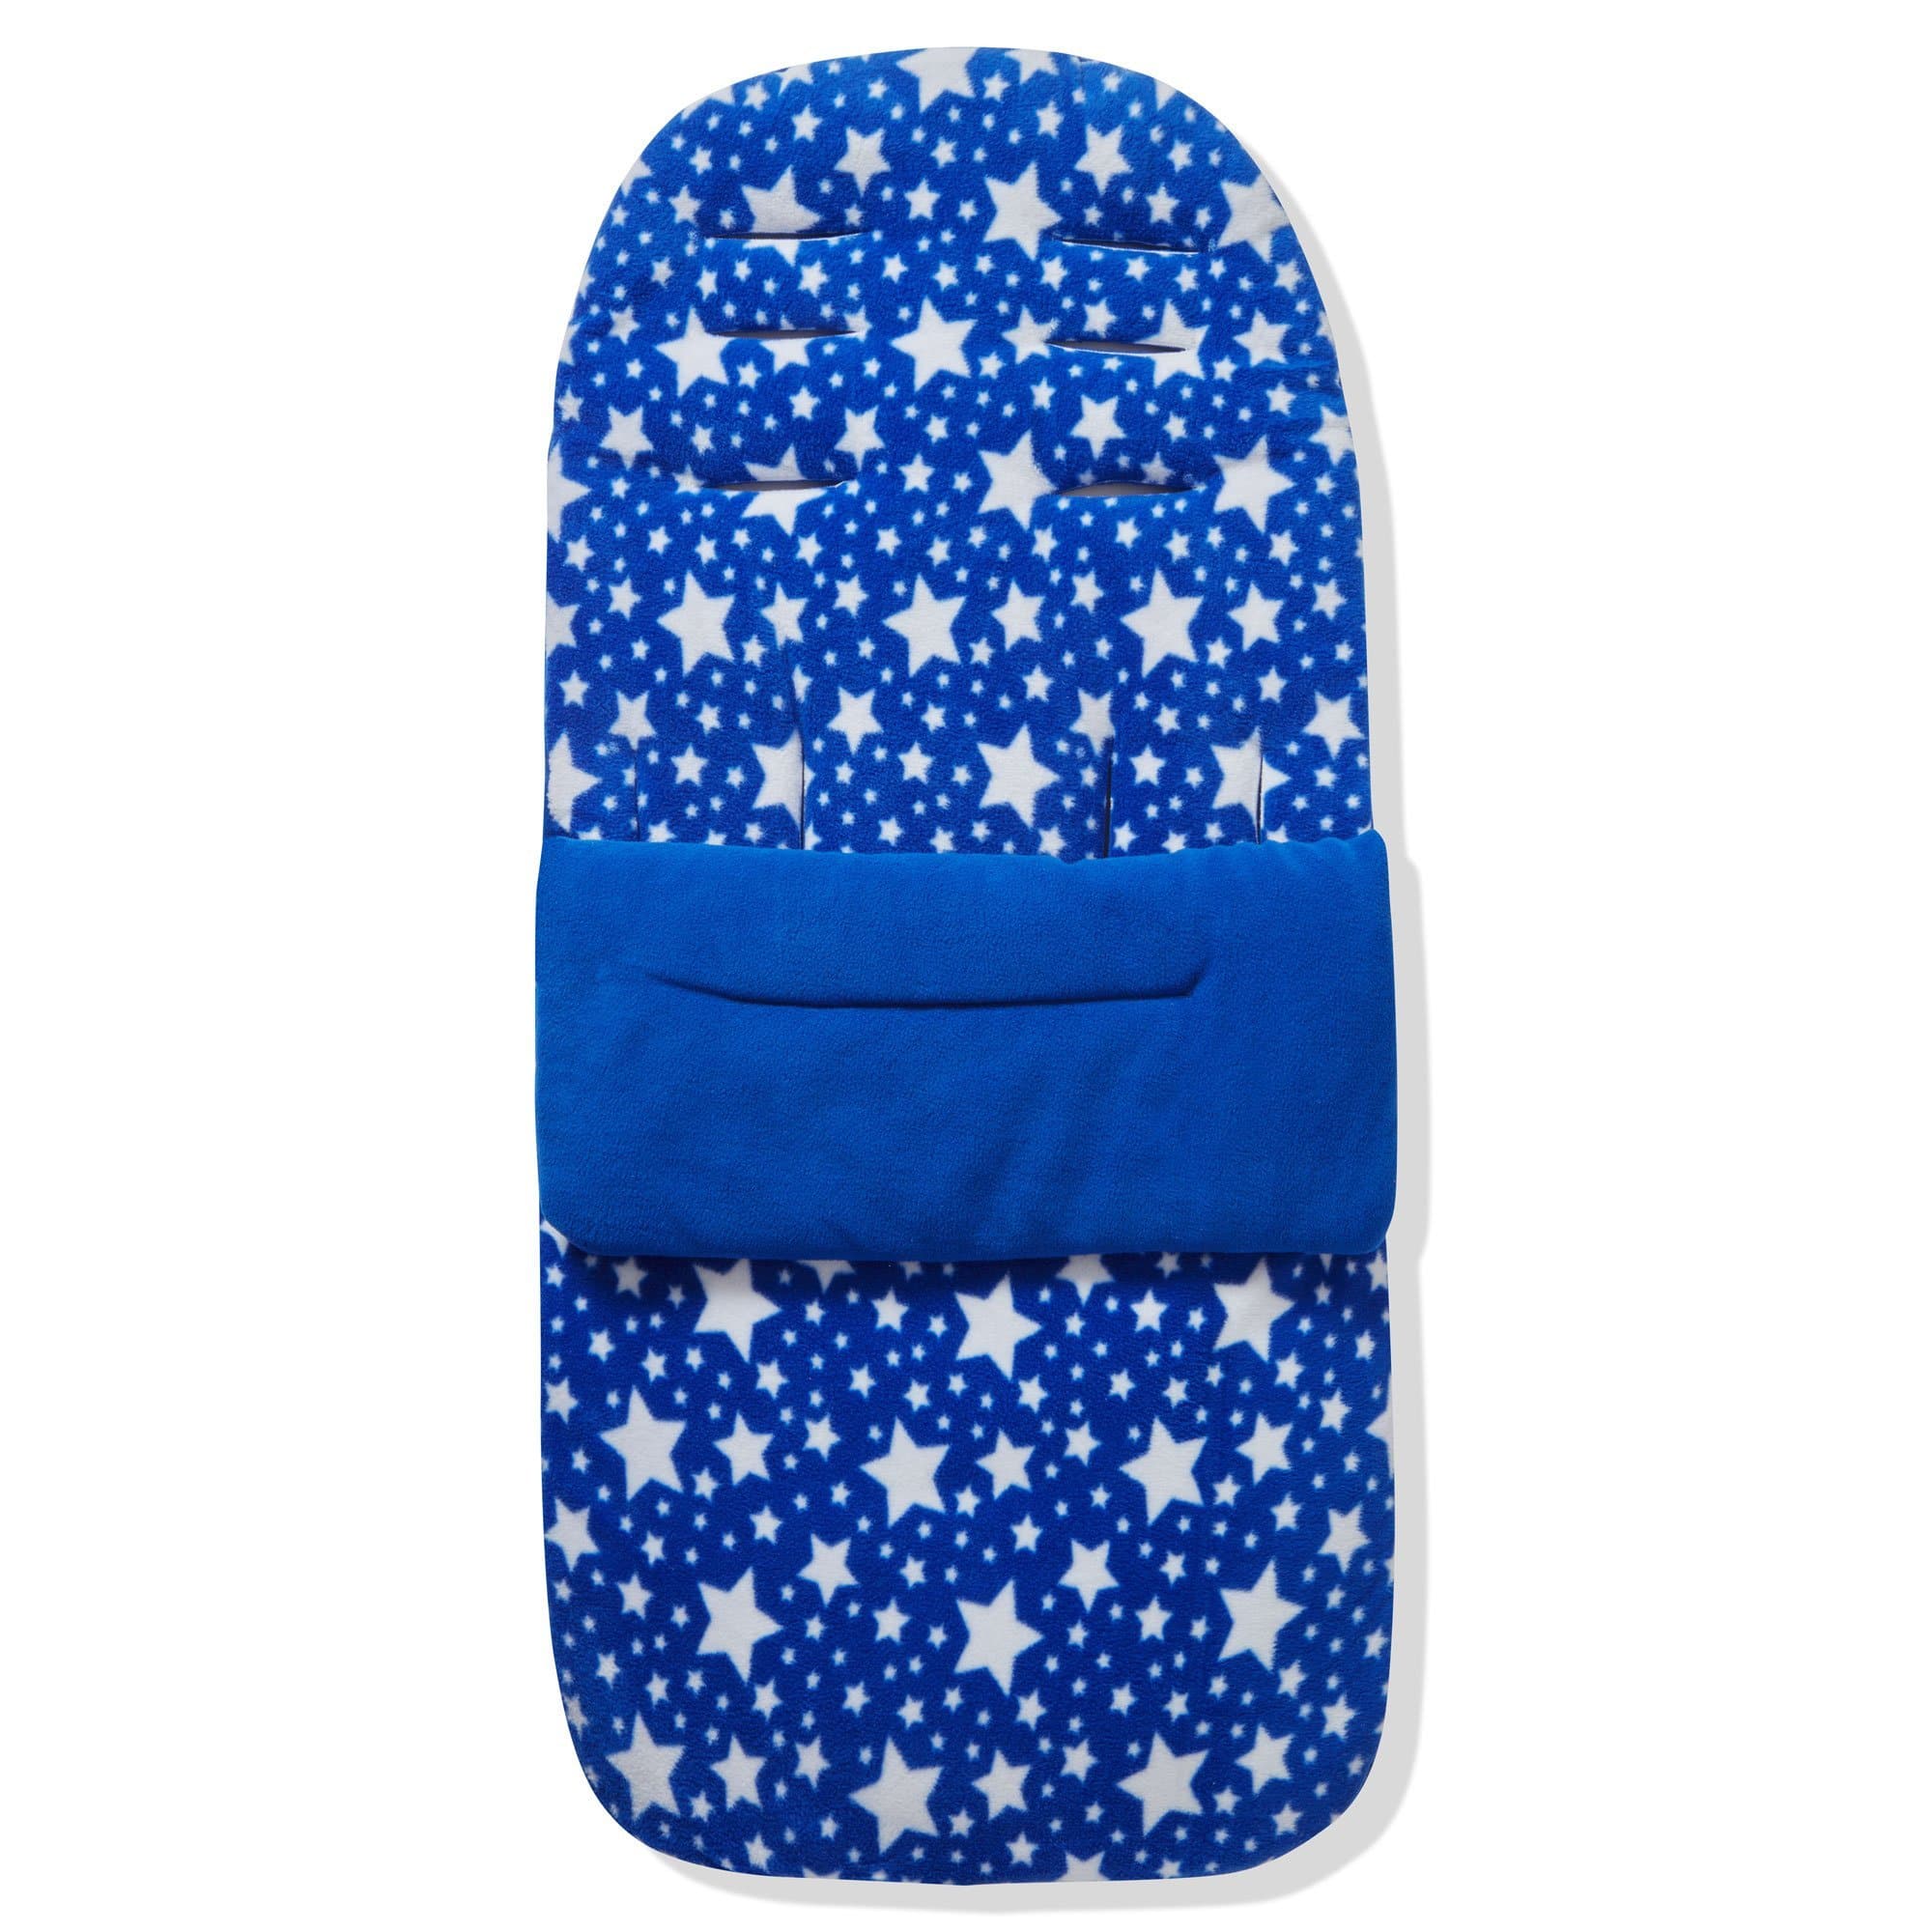 Fleece Footmuff / Cosy Toes Compatible with Cybex - Blue Star / Fits All Models | For Your Little One